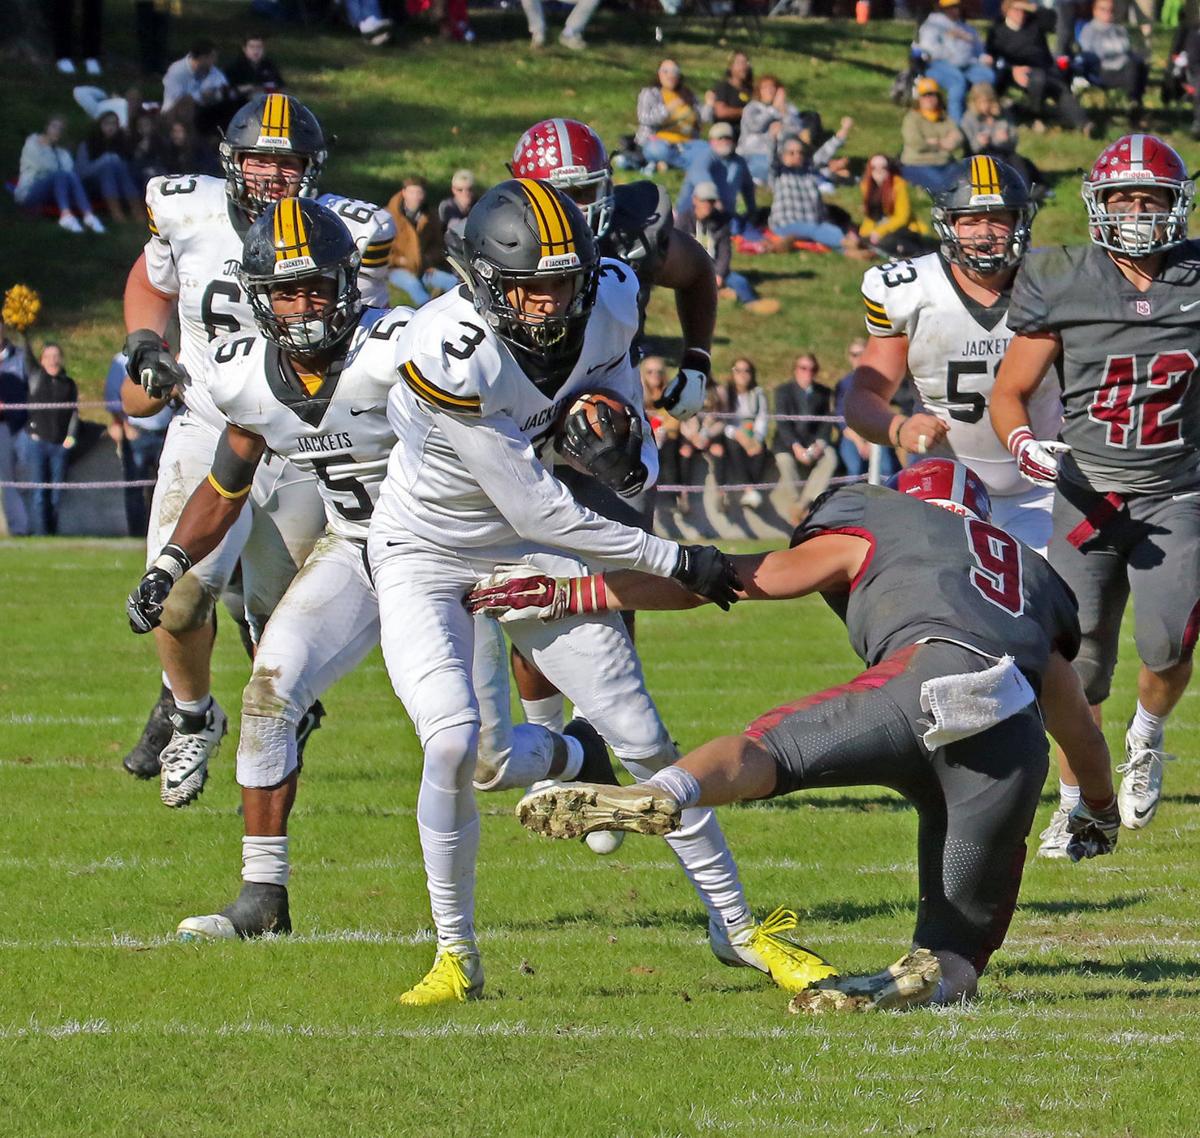 RandolphMacon wins 'The Game' for fifth straight year, claims ODAC